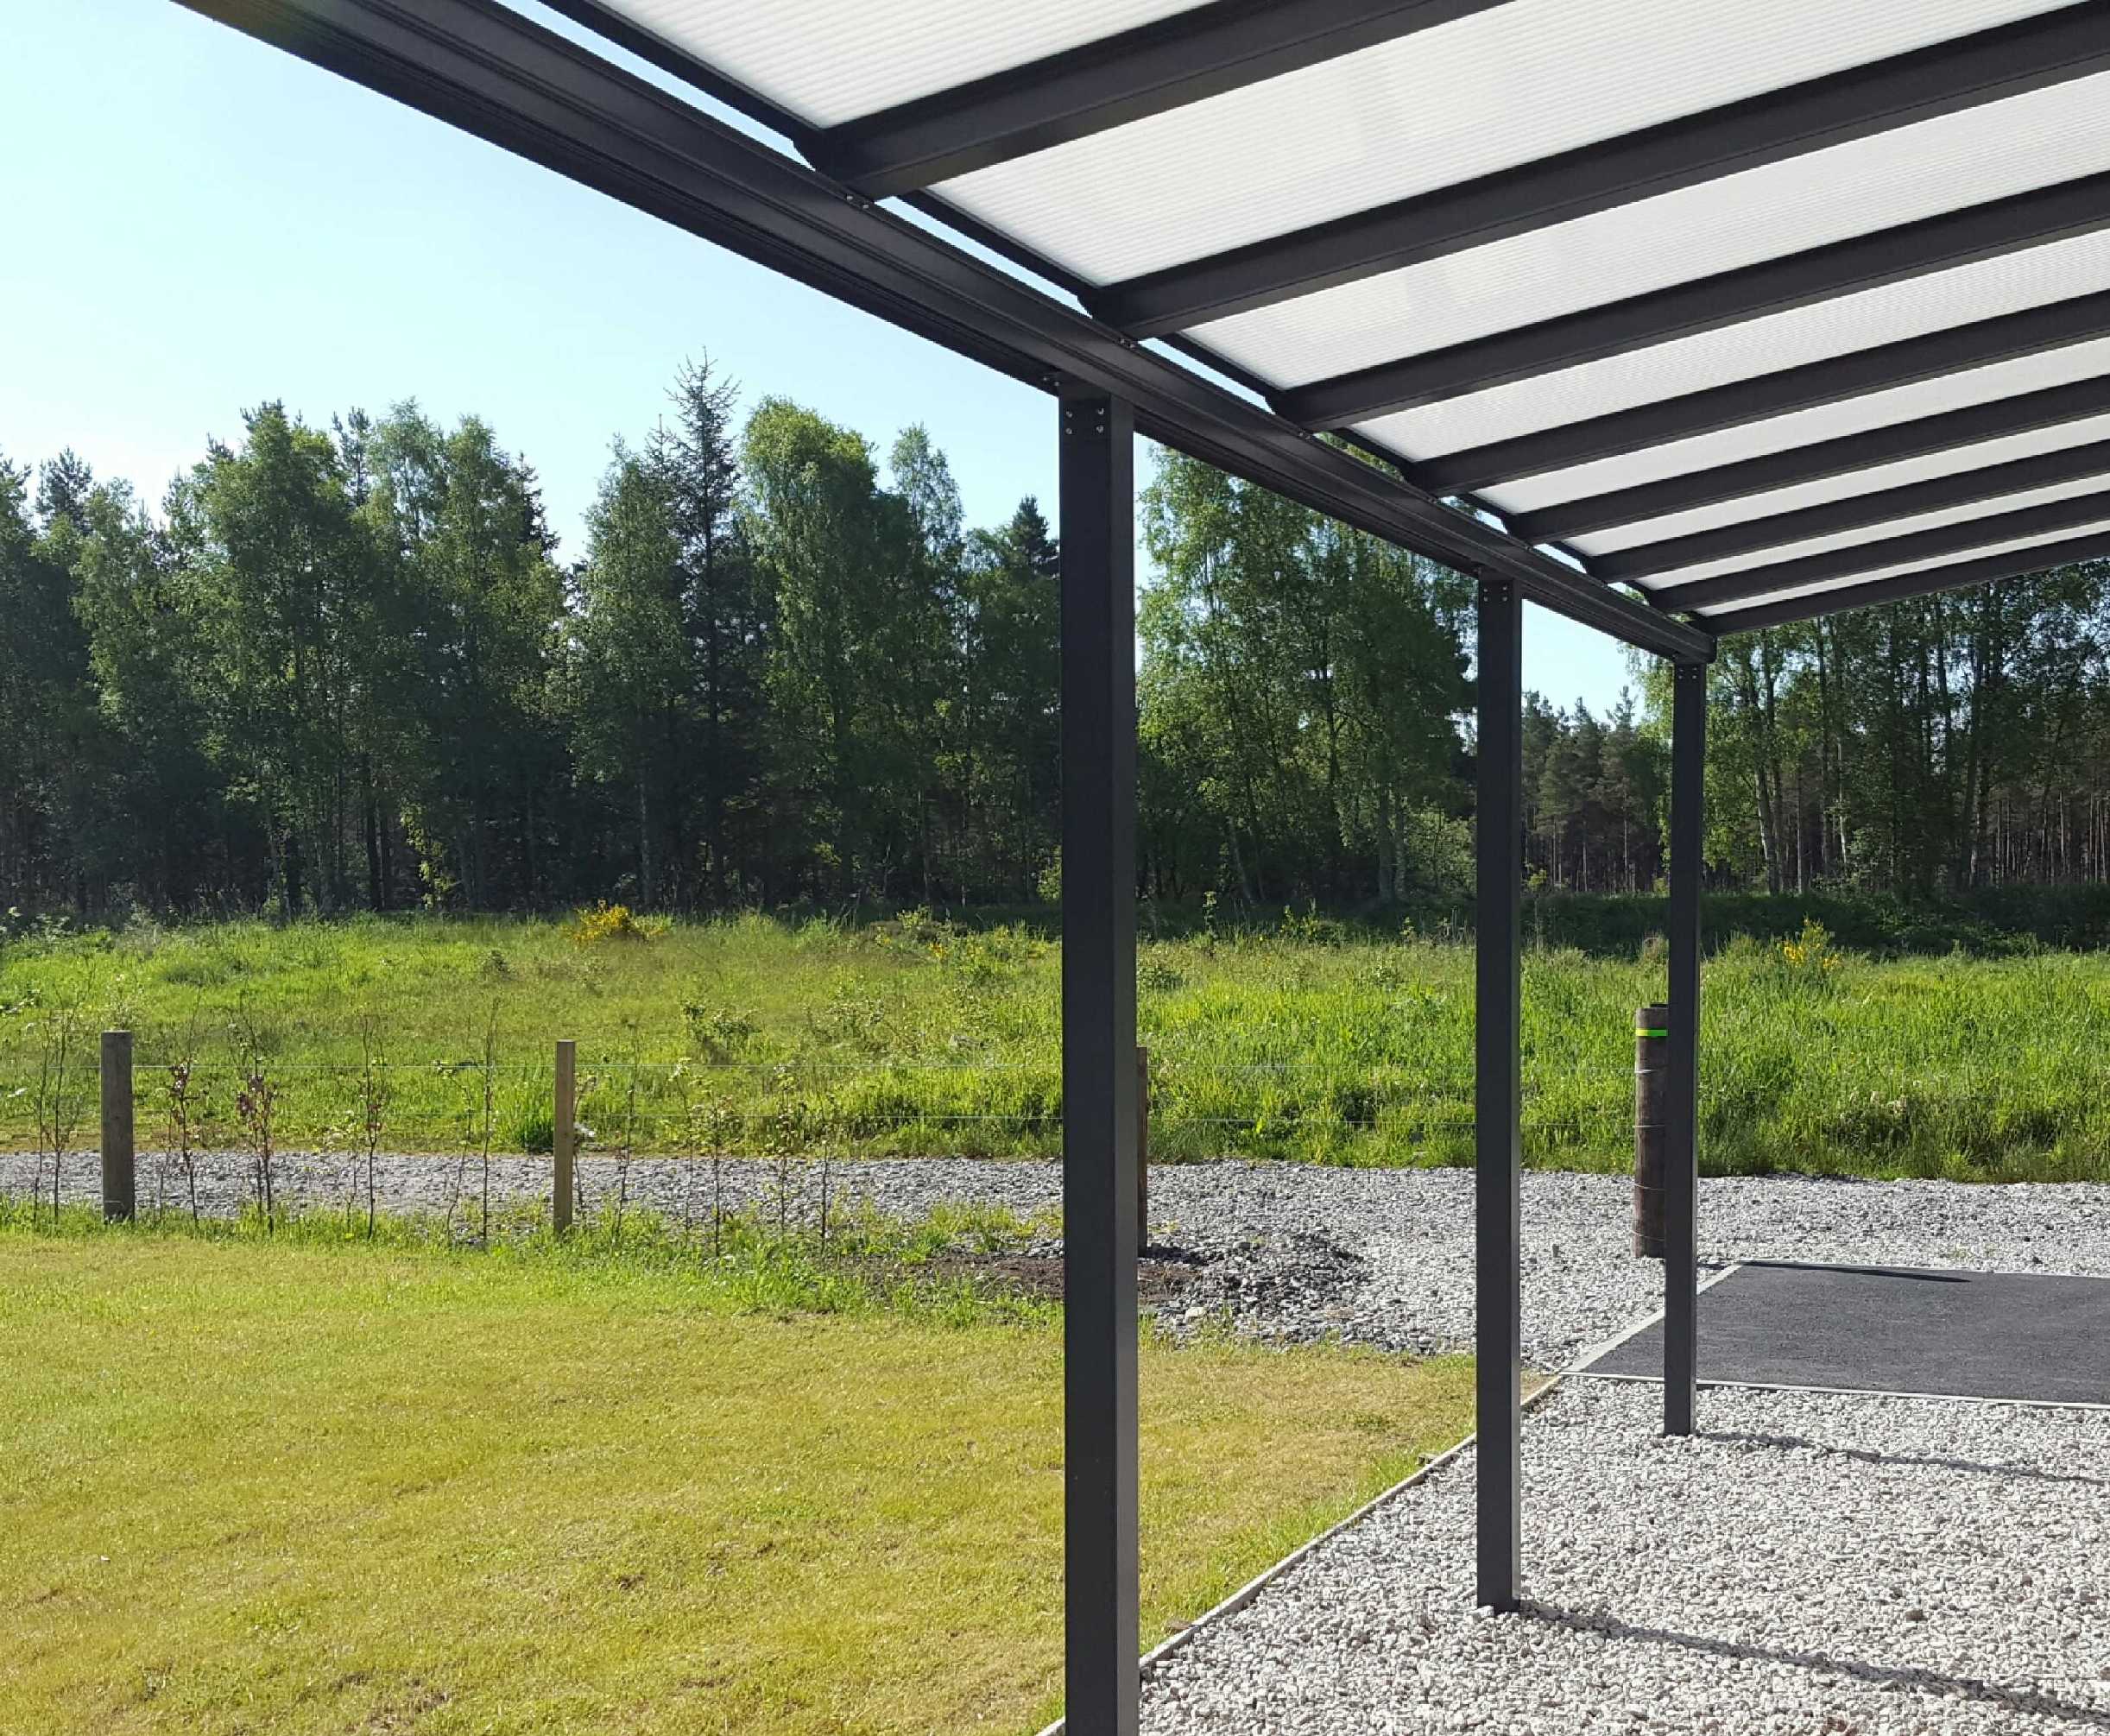 SPECIAL OFFER Omega Smart Lean-To Canopy, Anthracite Grey, 16mm Polycarbonate Glazing - 6.0m (W) x 2.5m (P), (3) Supporting Posts